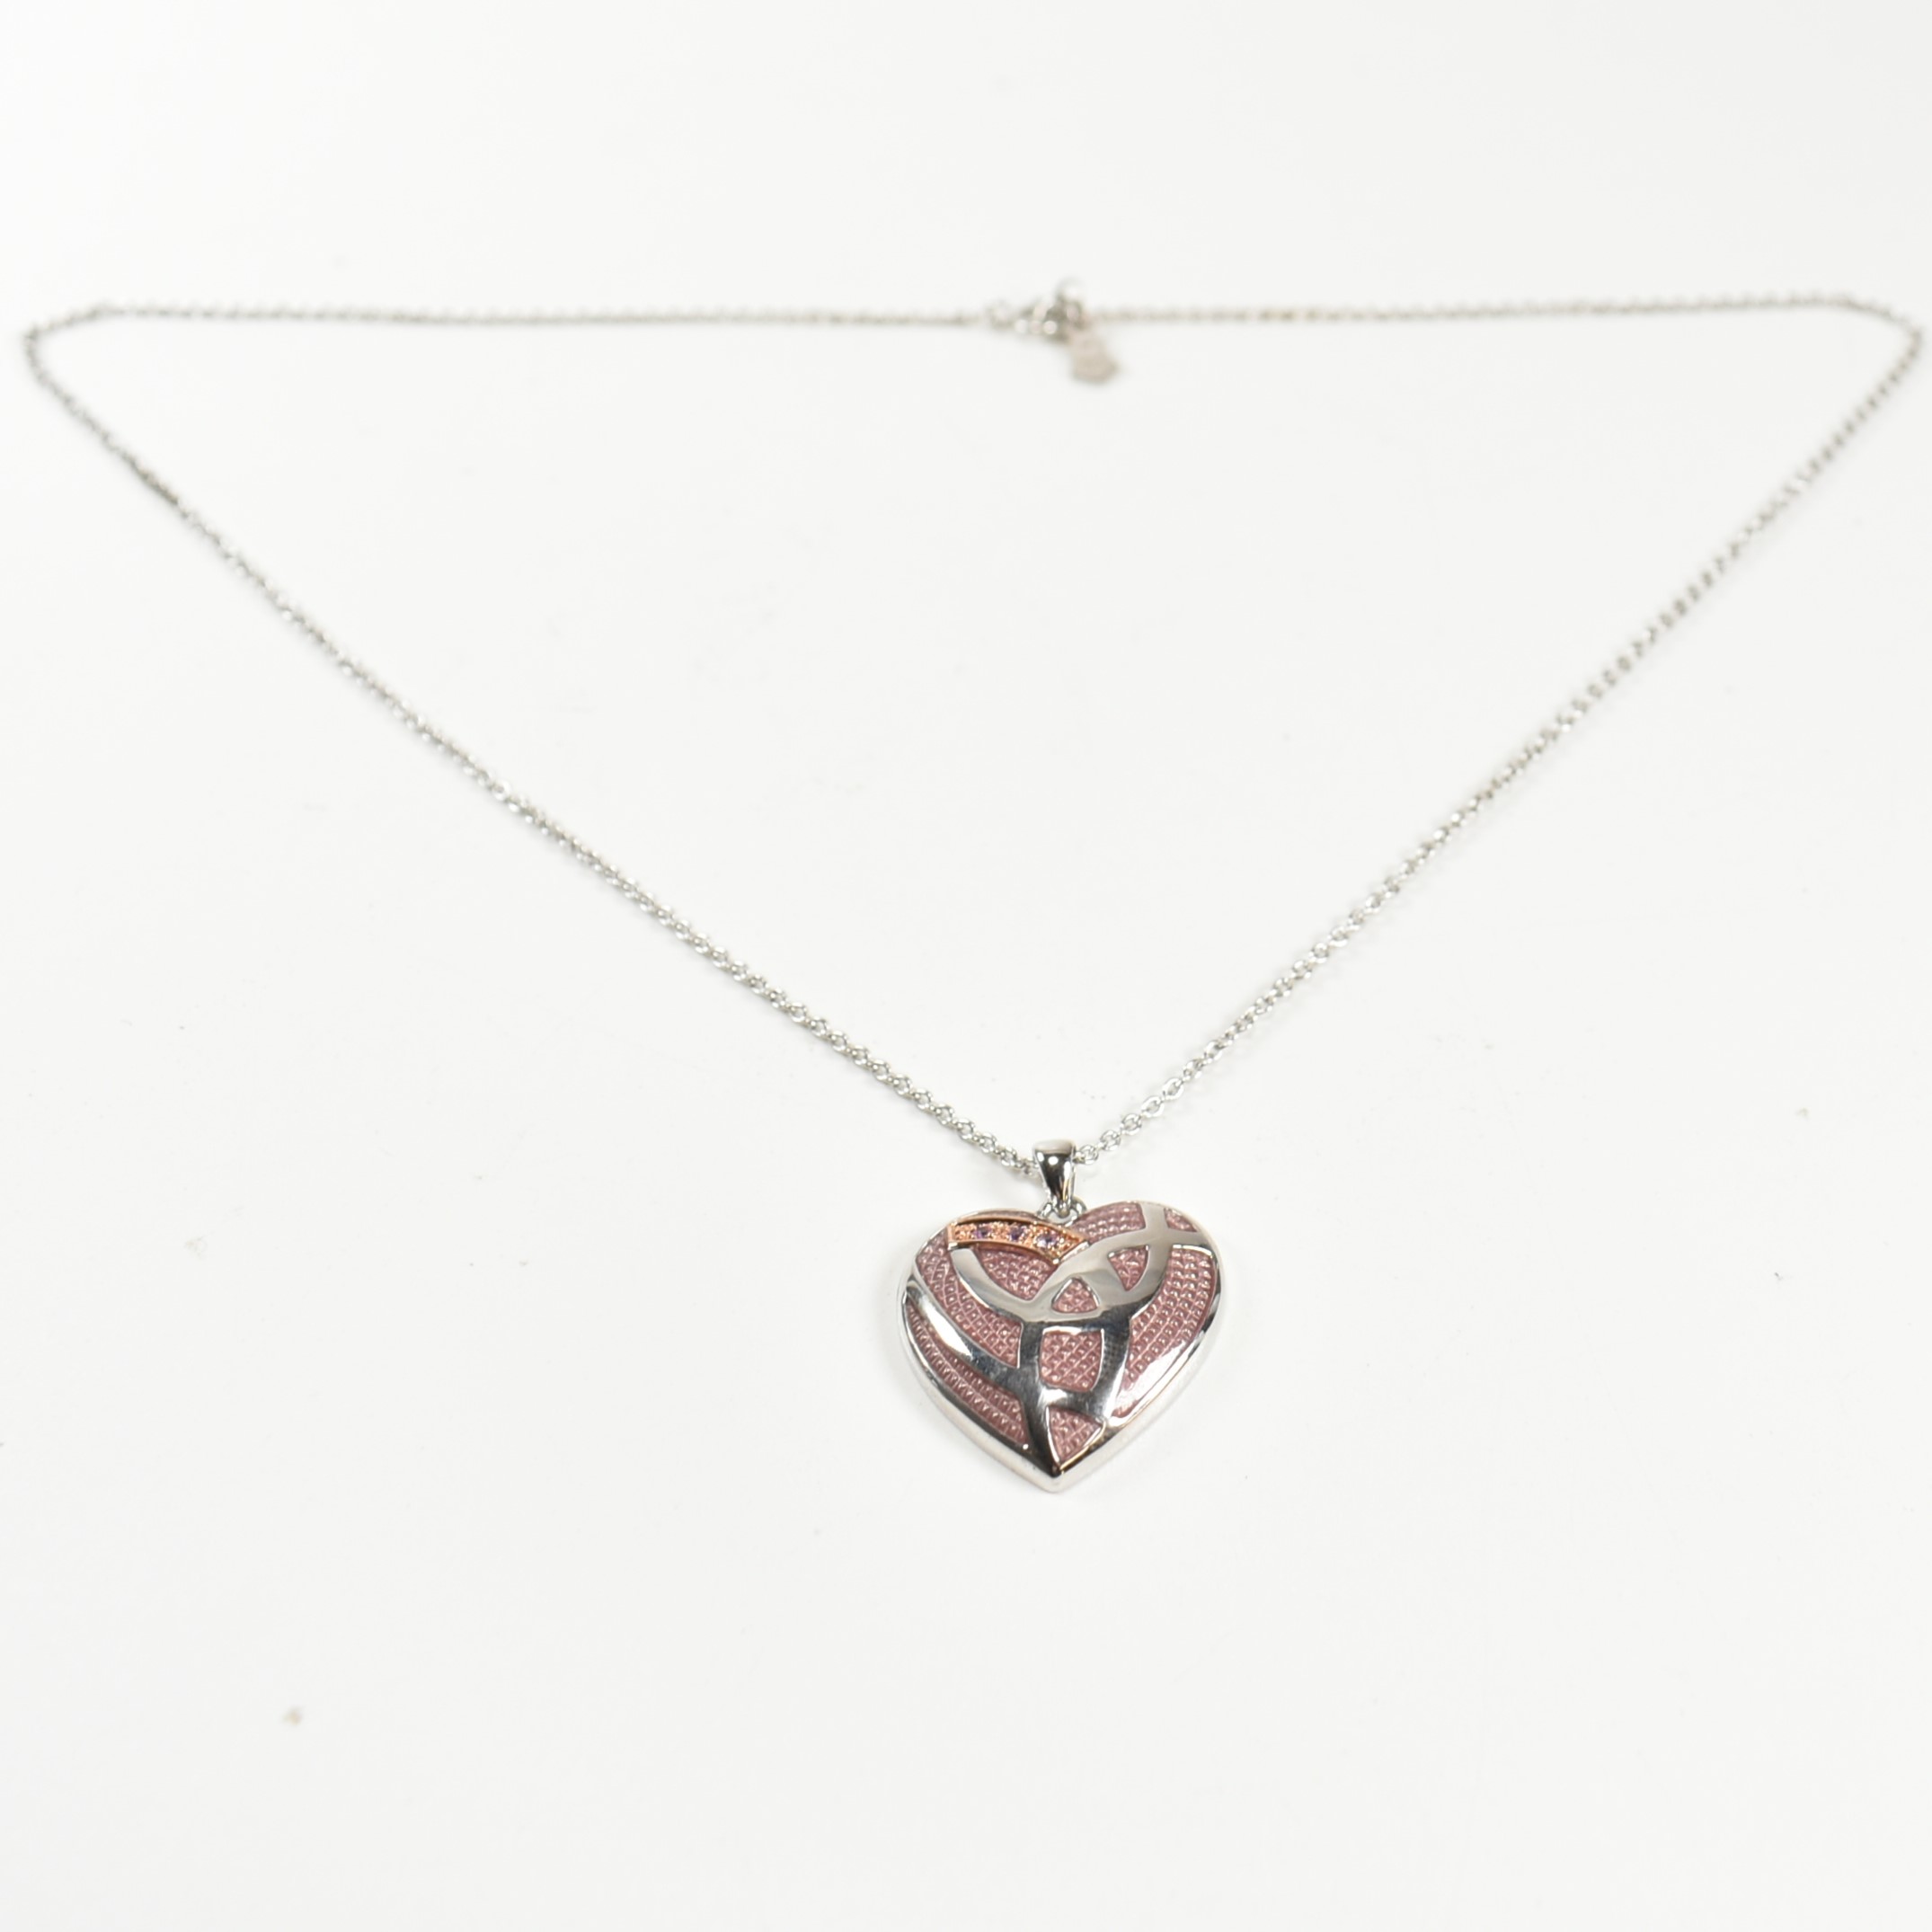 HALLMARKED SILVER CLOGAU CELTIC HEART PENDANT NECKLACE - Image 2 of 6